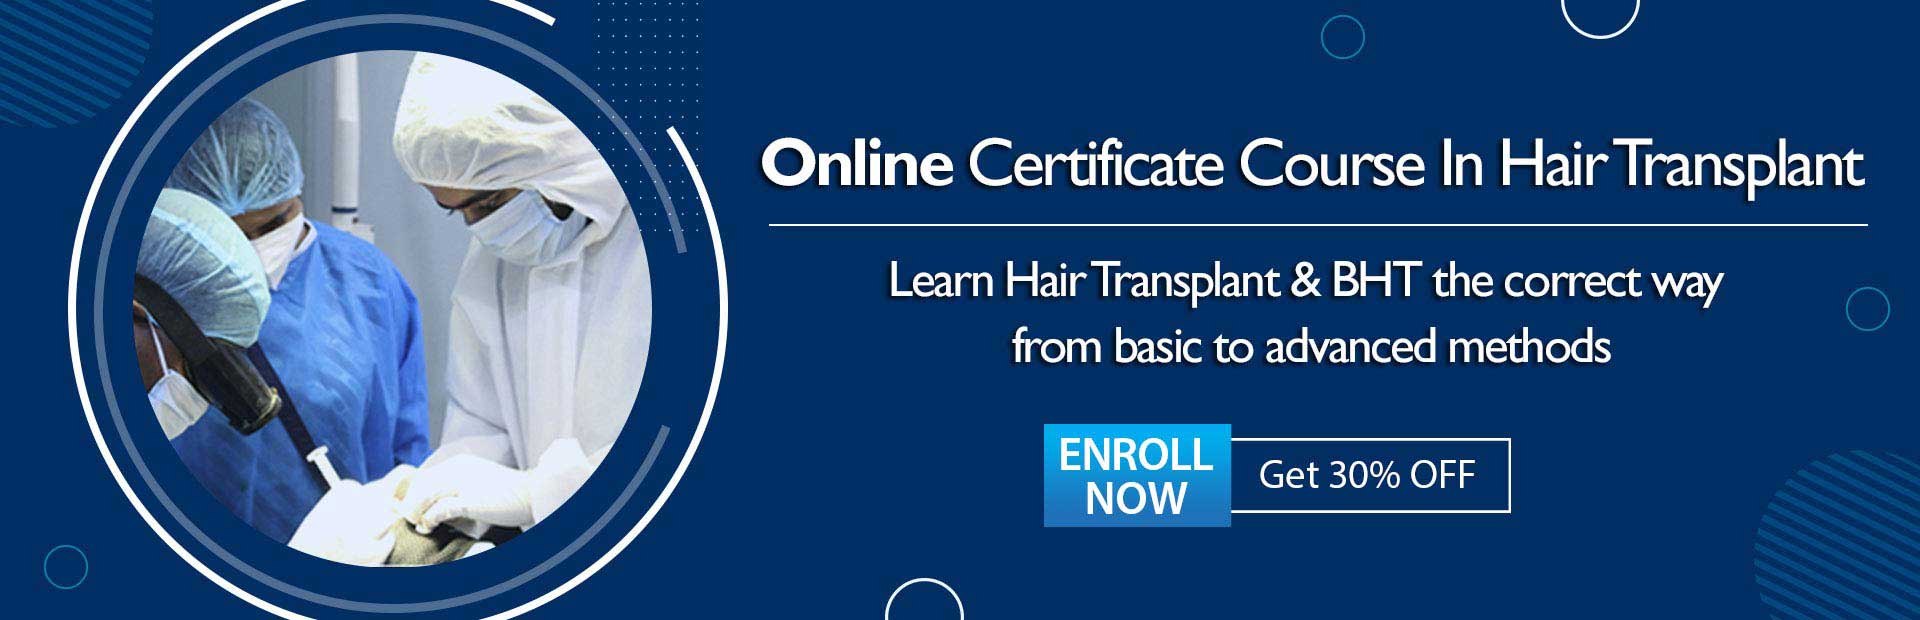 Online Certificate Course In Hair Transplant